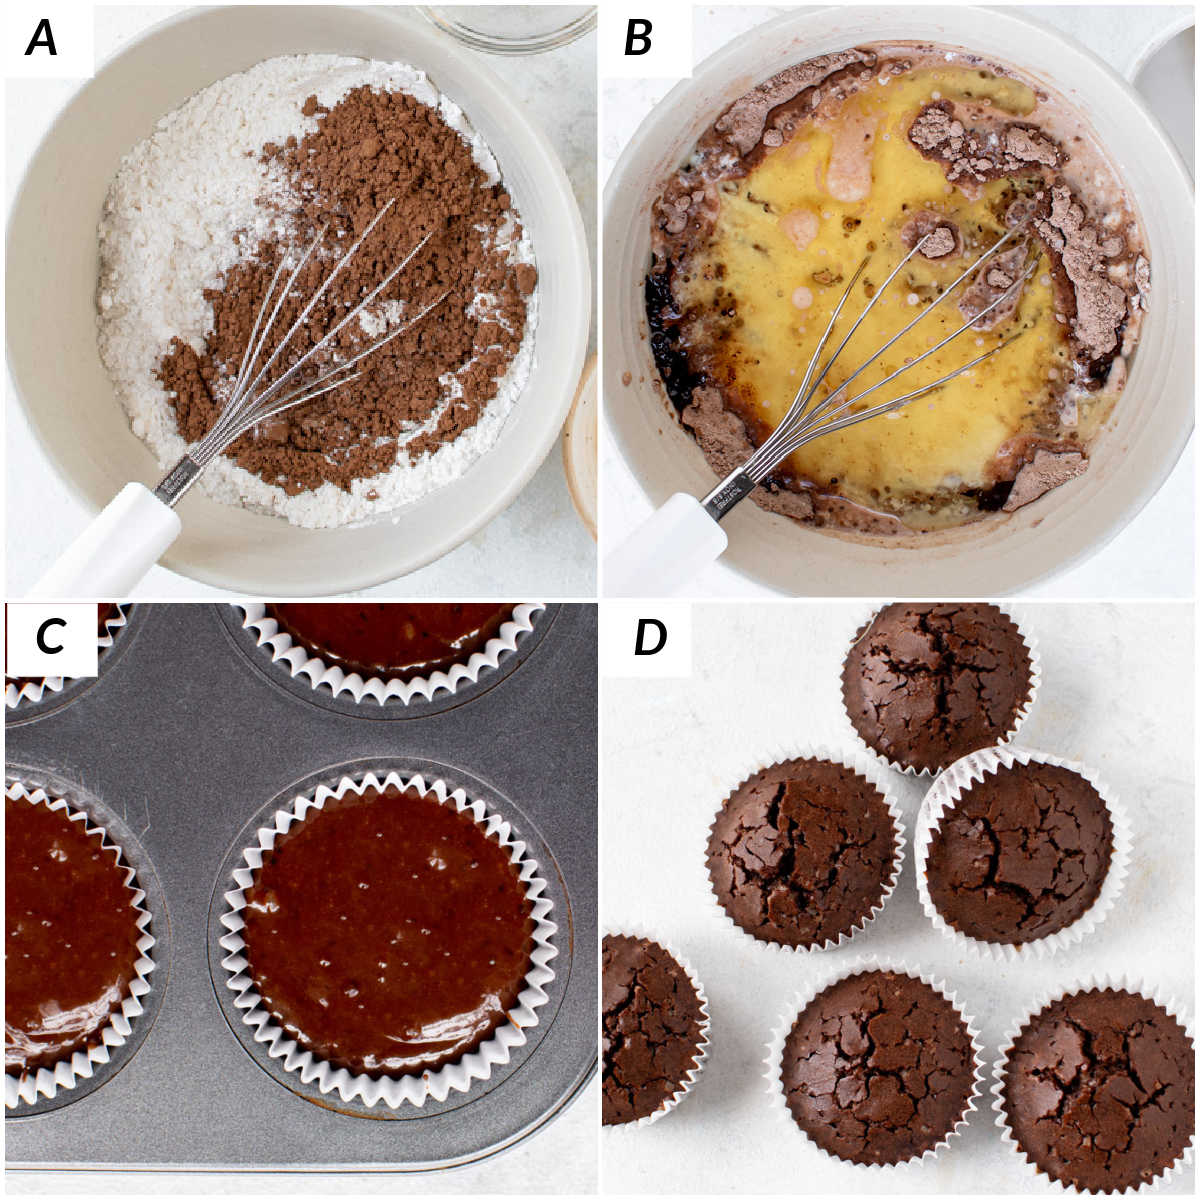 image collage showing the steps for baking halloween cupcakes